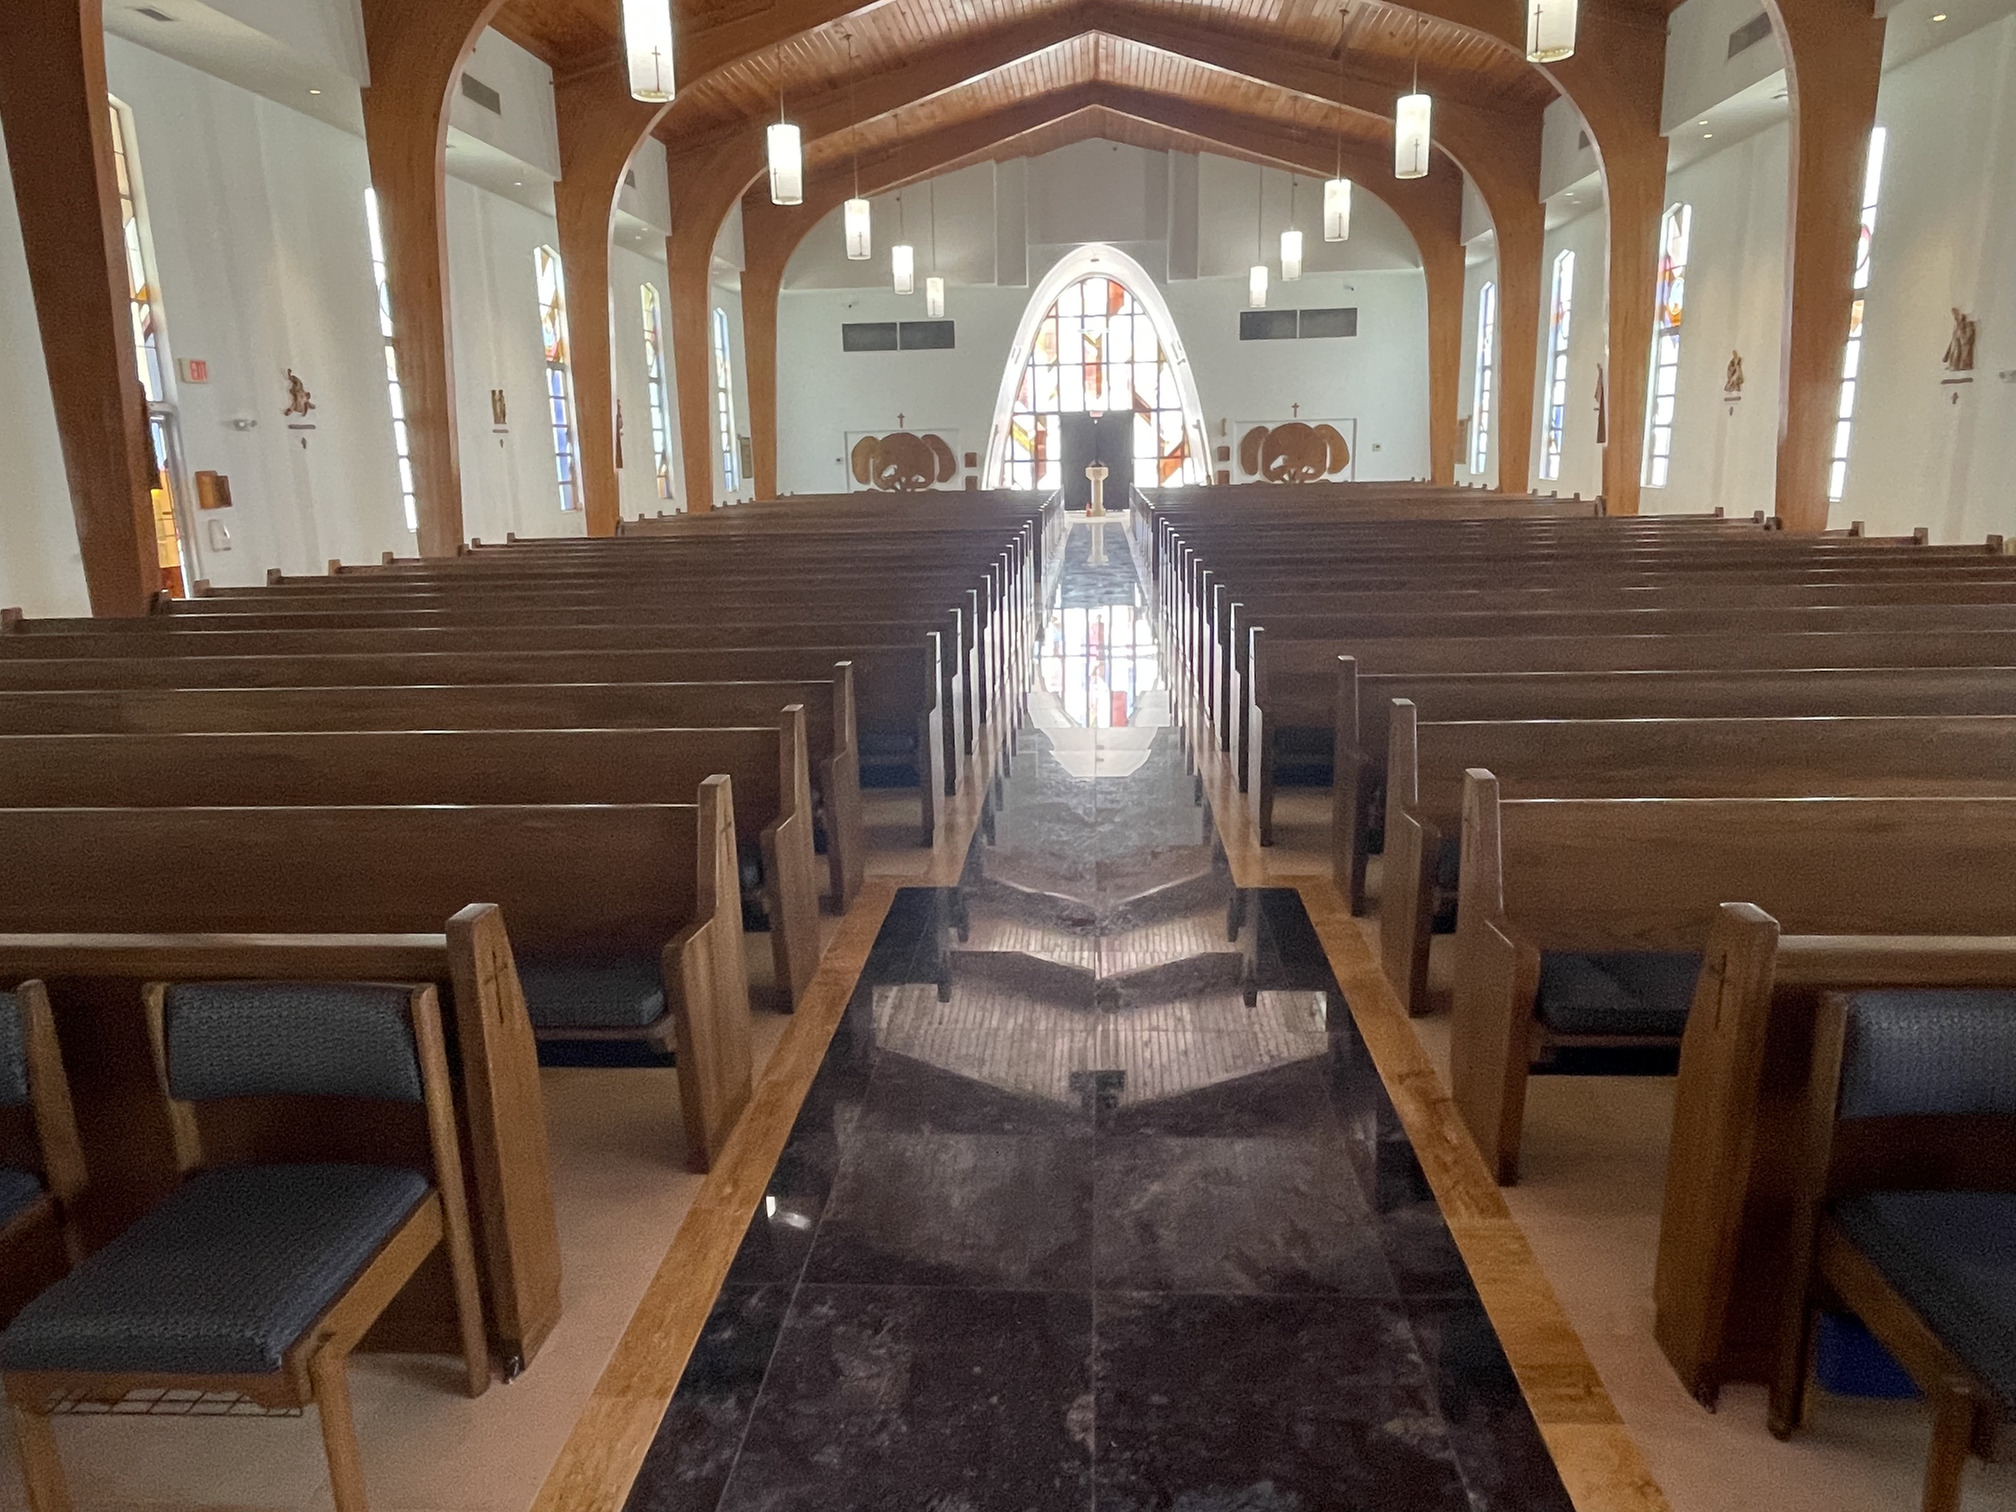 center aisle view photo Saint Michael the Archangel Catholic in Siesta Key, Florida after their pews were refinished by Woods Church Interiors